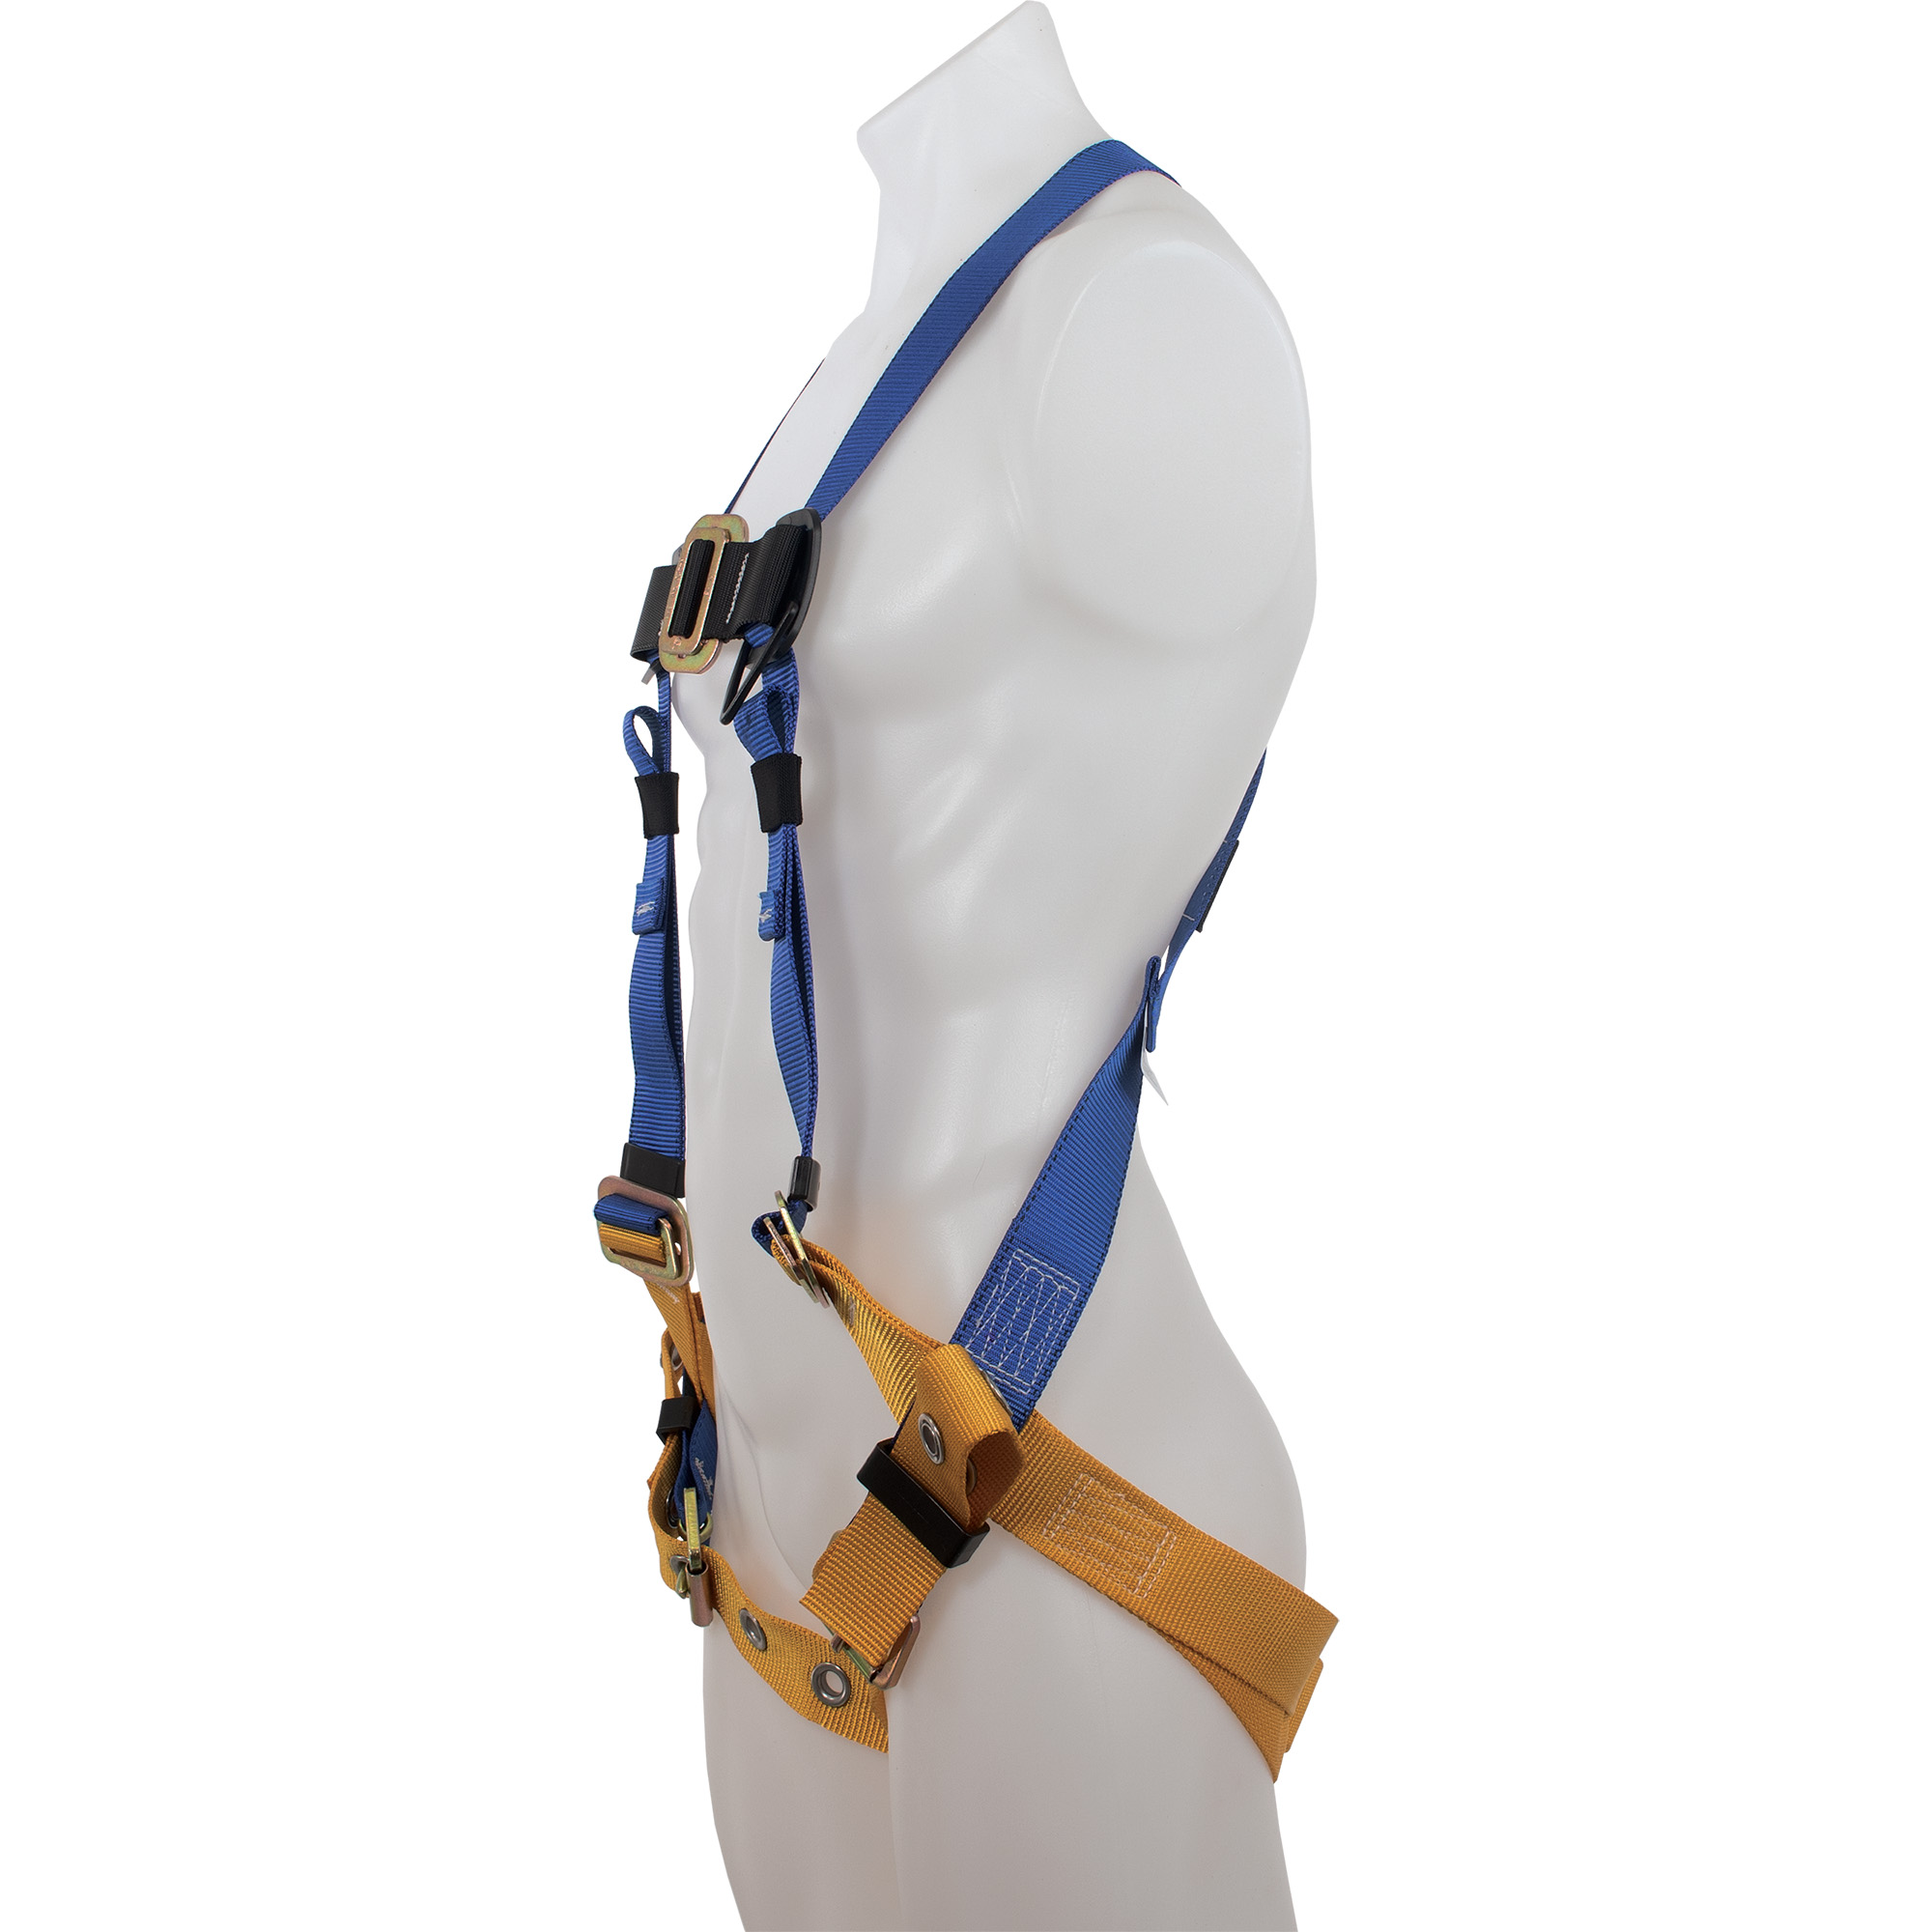 Werner Base Wear Standard Harness with Tongue Buckle Legs - White Cap